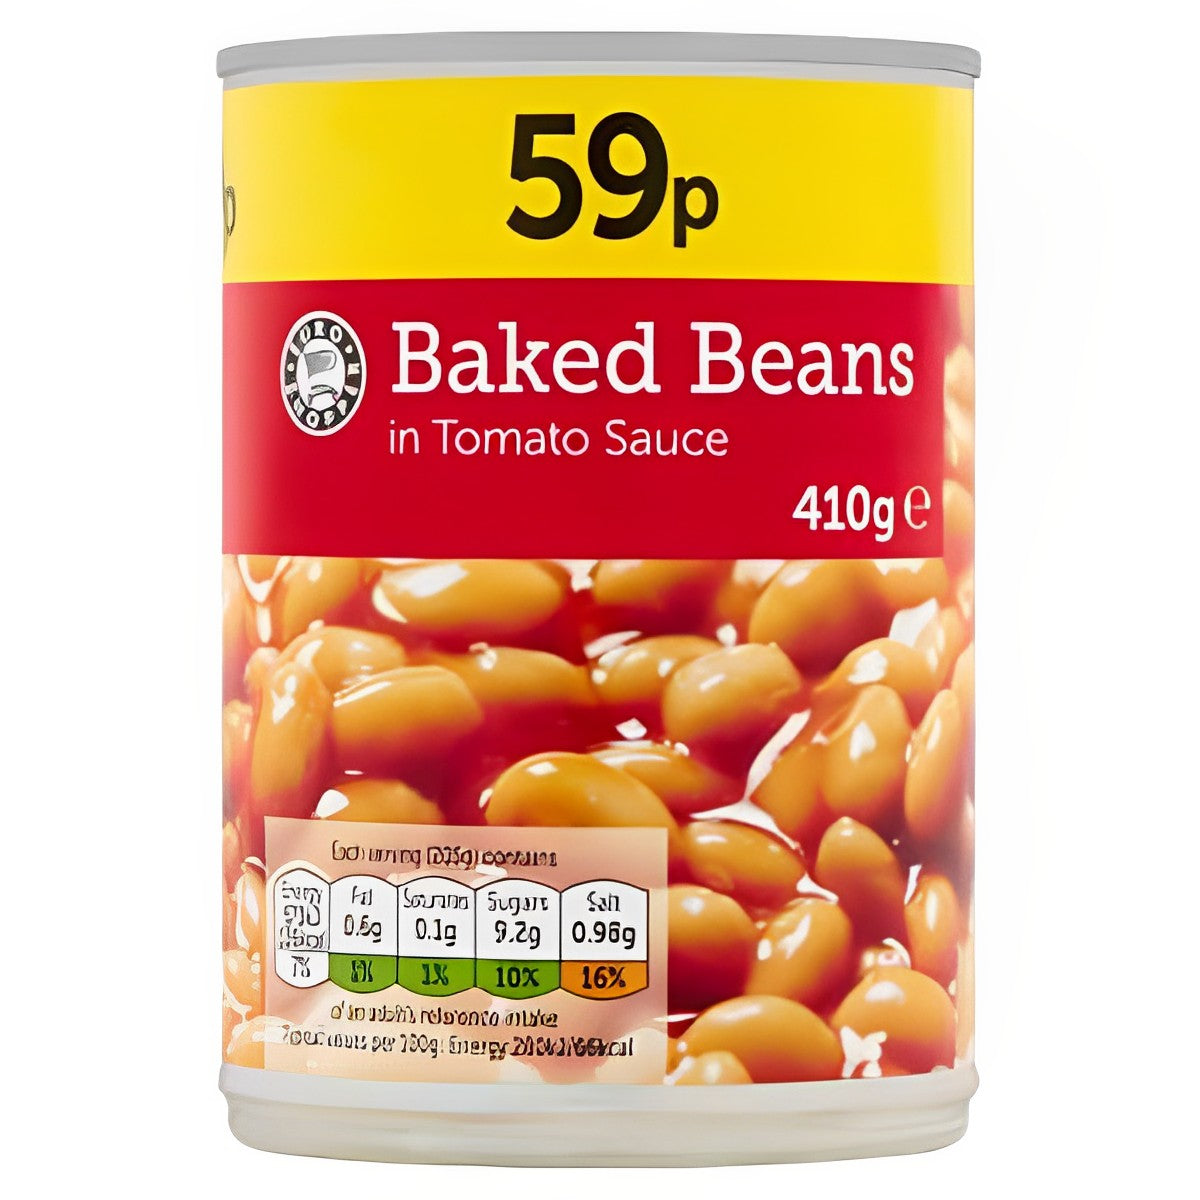 Euro Shopper - Baked Beans in Tomato Sauce - 410g - Continental Food Store